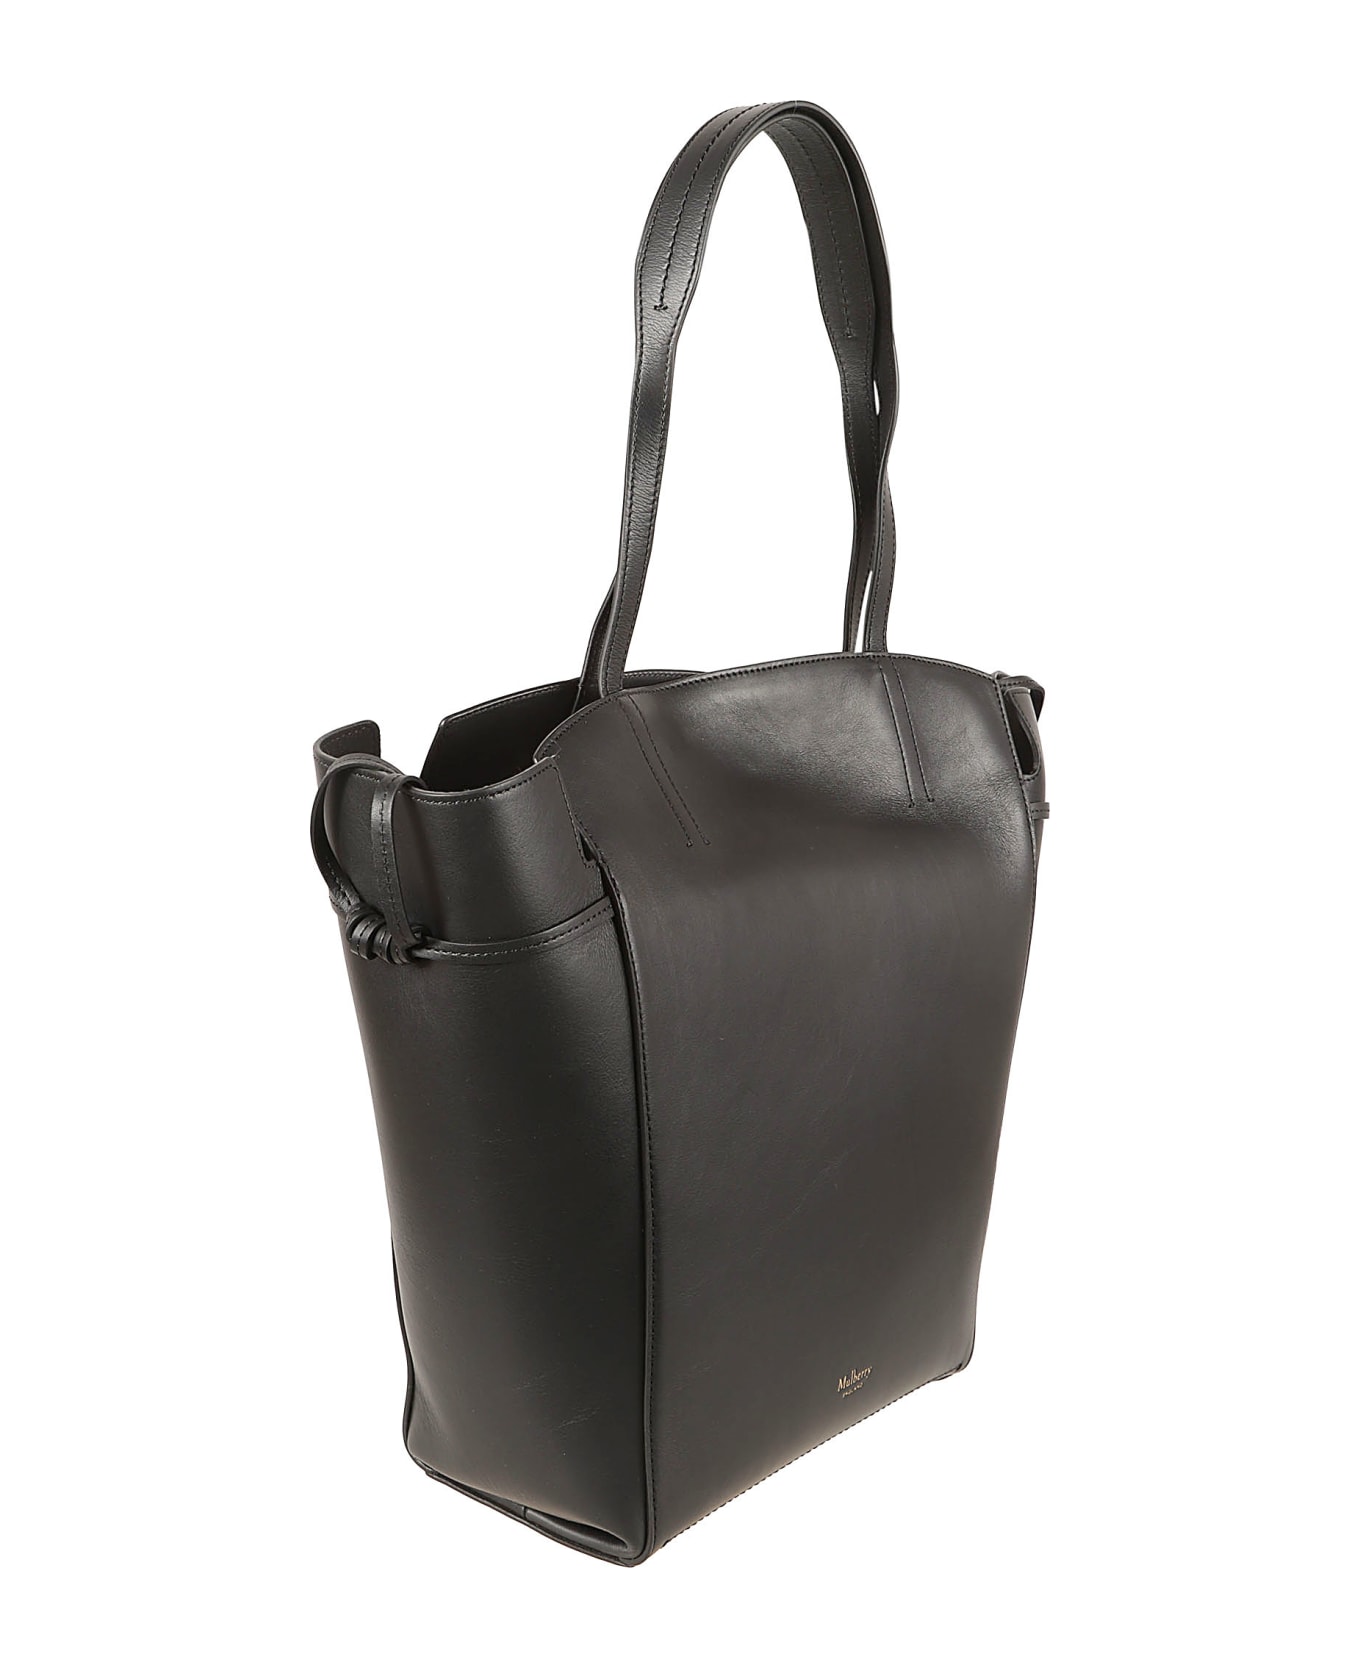 Mulberry Clovelly Tote - Black